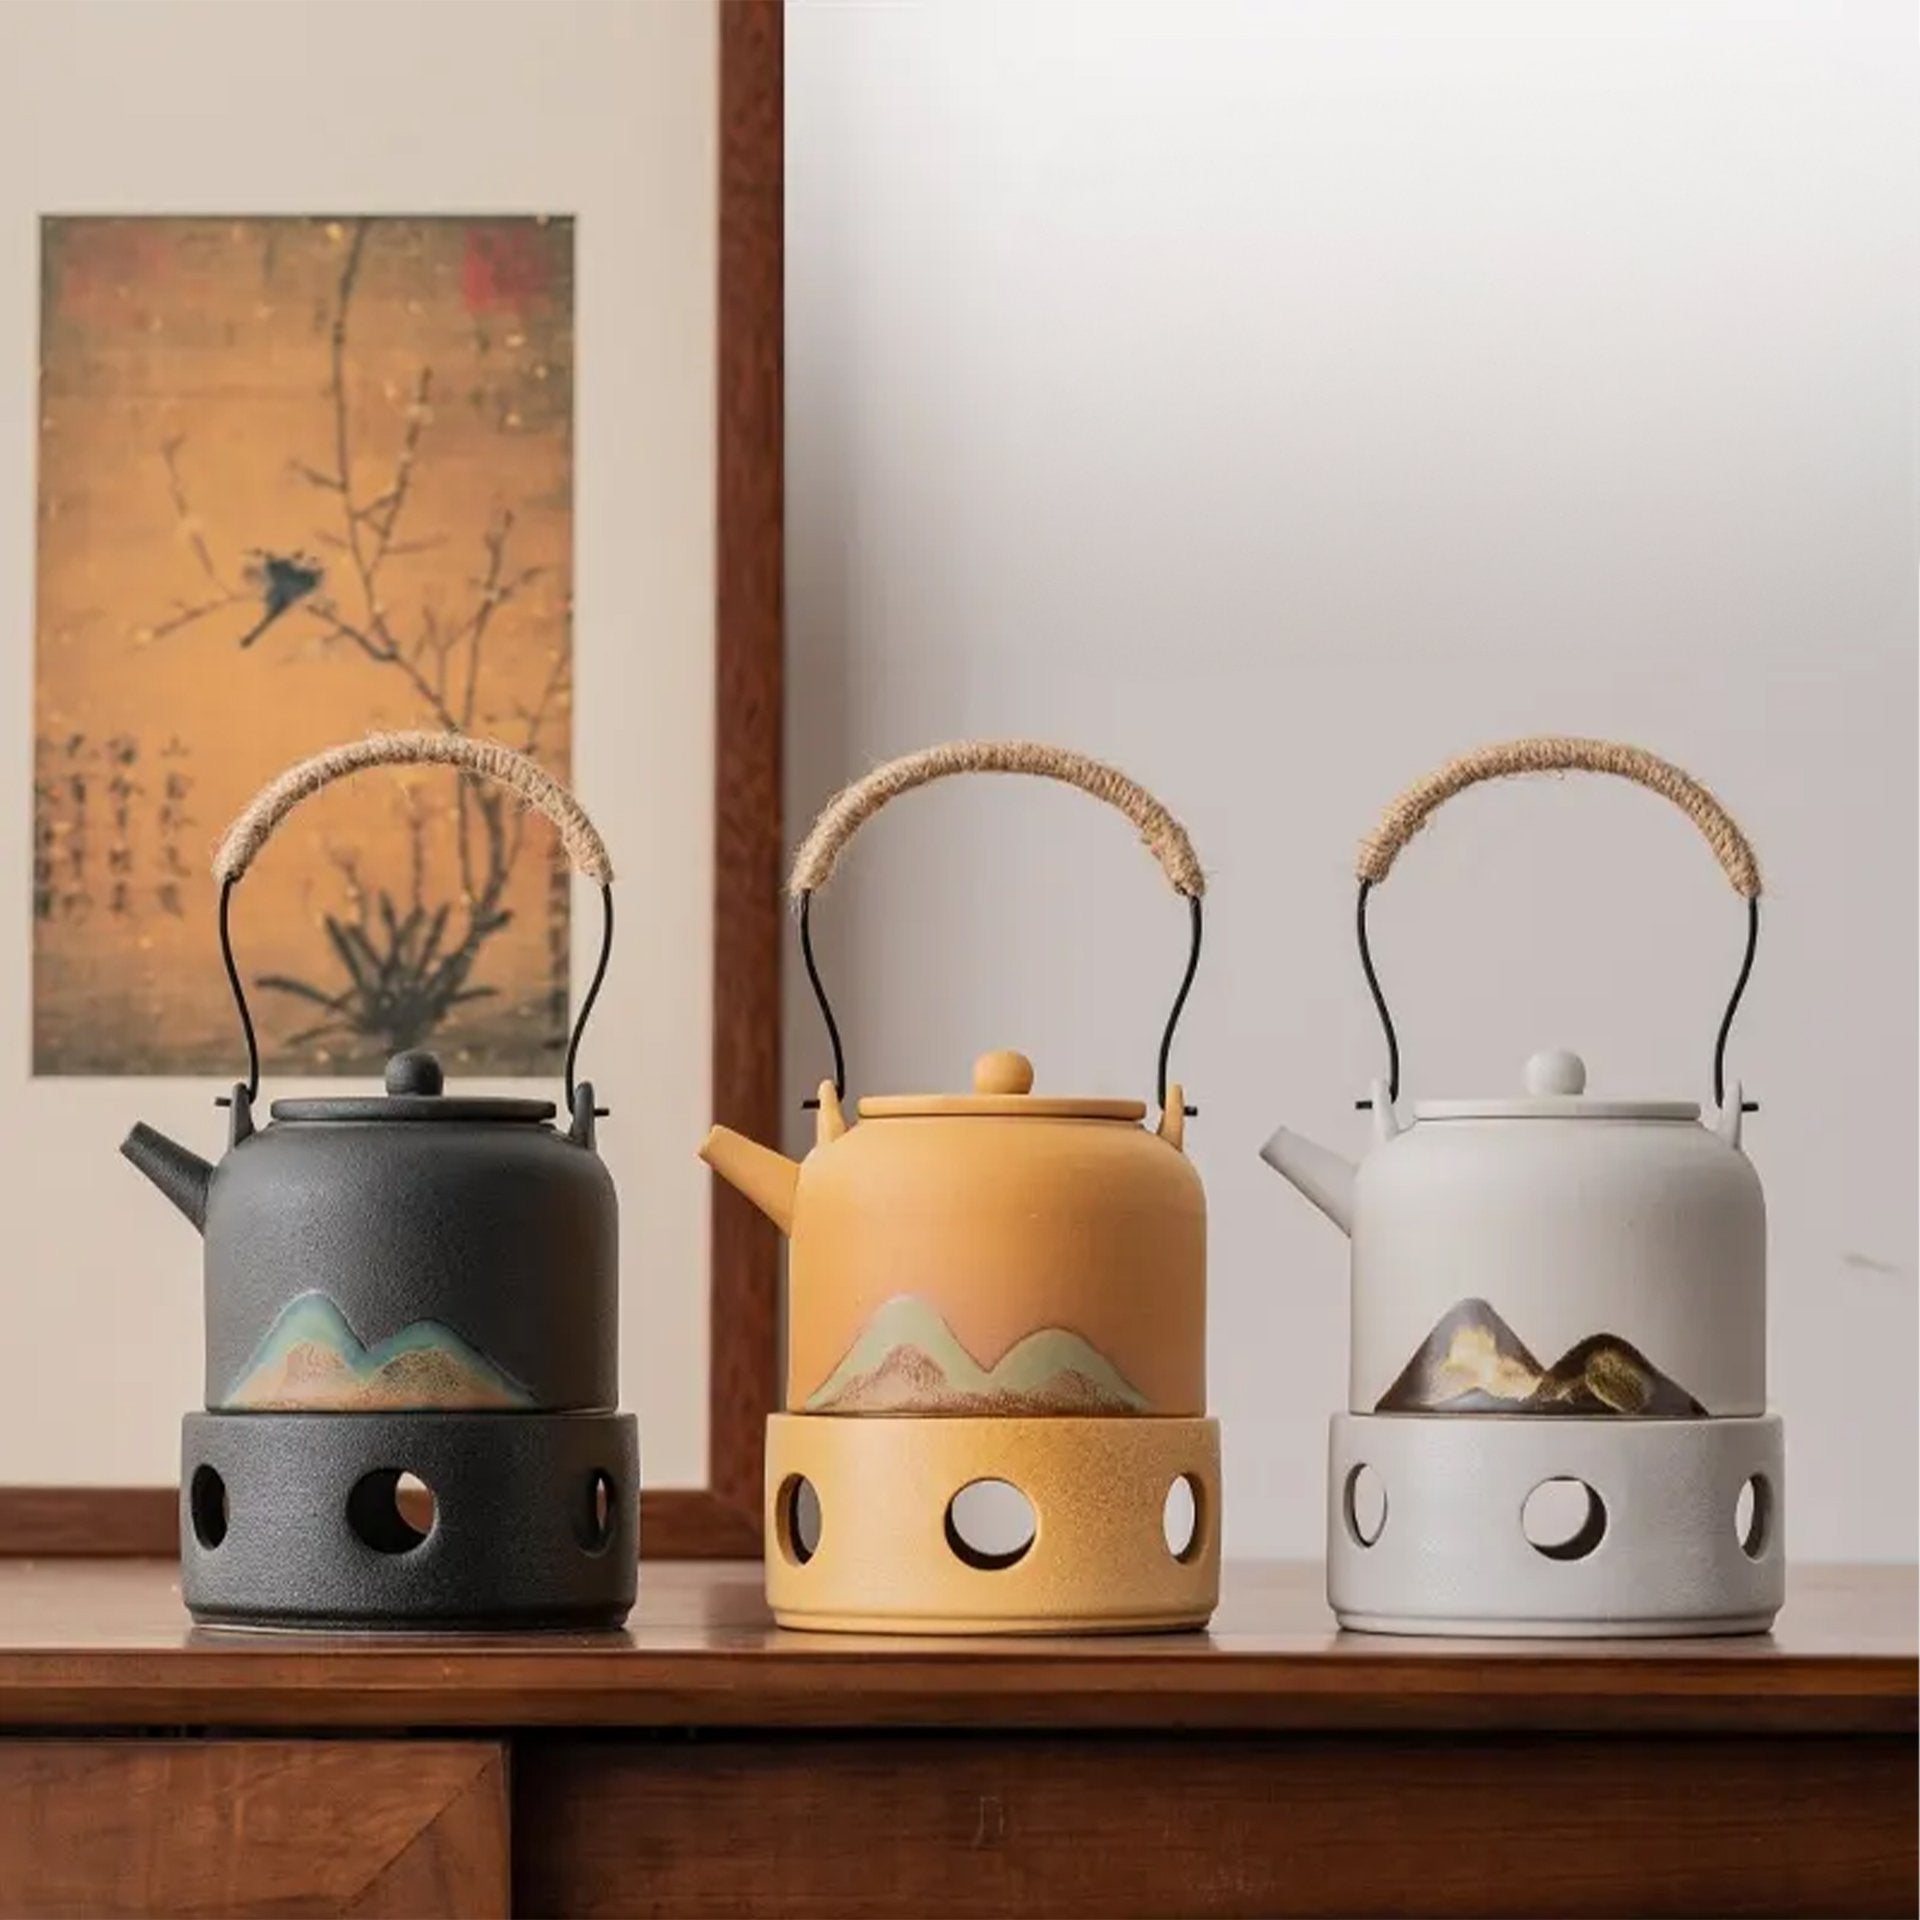 Three ceramic kettles on stoves in front of a painting, displayed on a wooden shelf